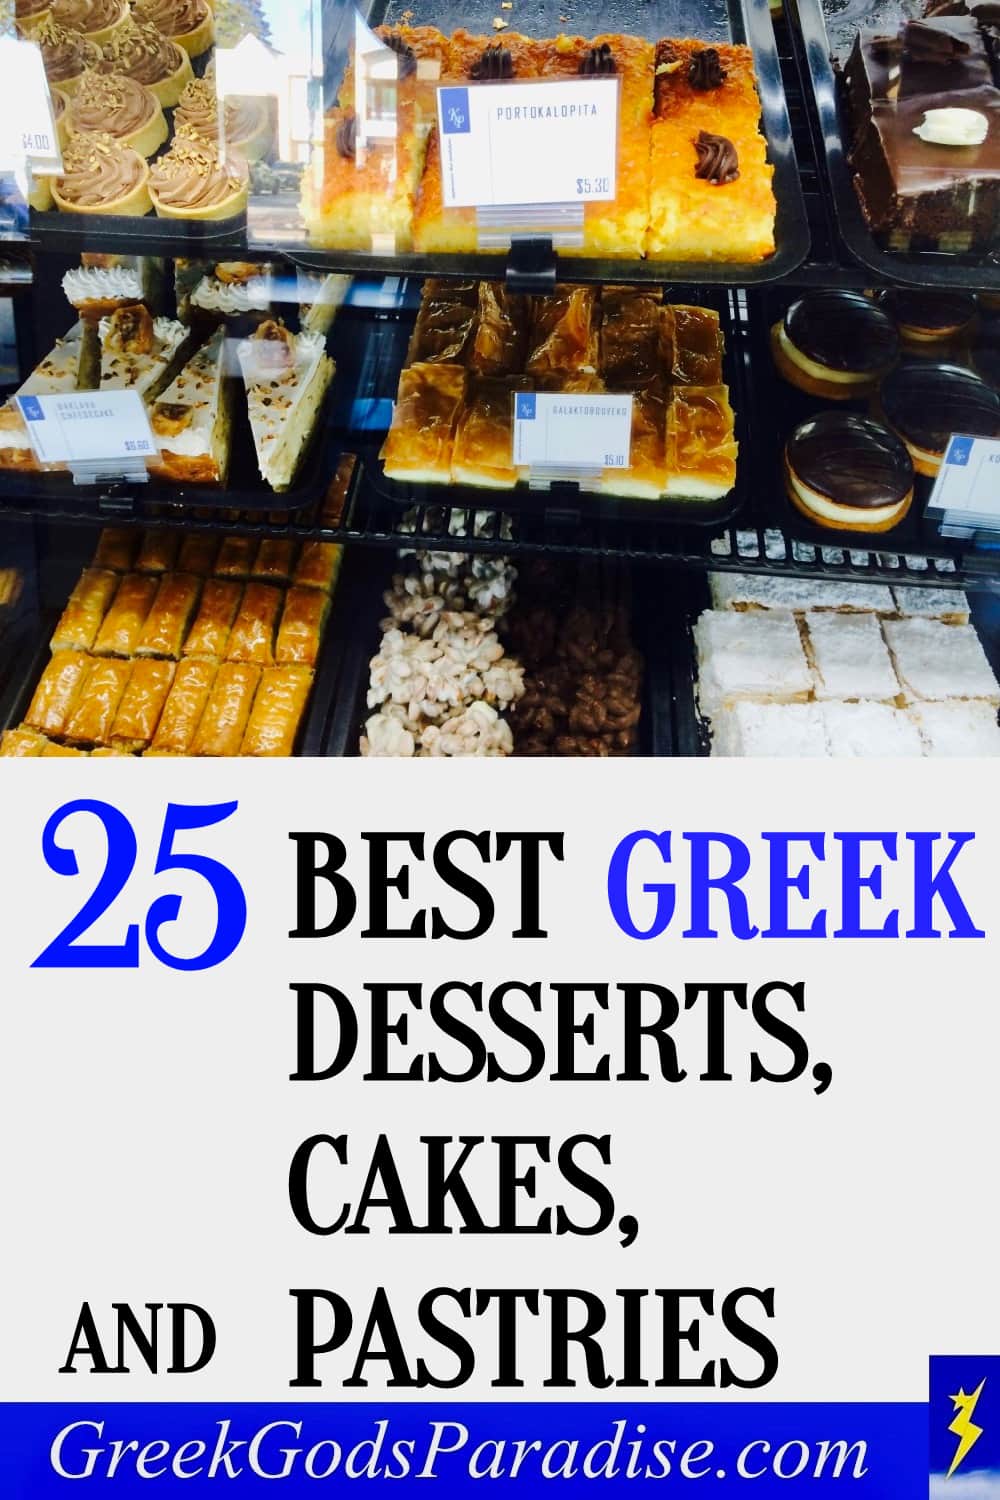 Best Greek Desserts Cakes and Pastries